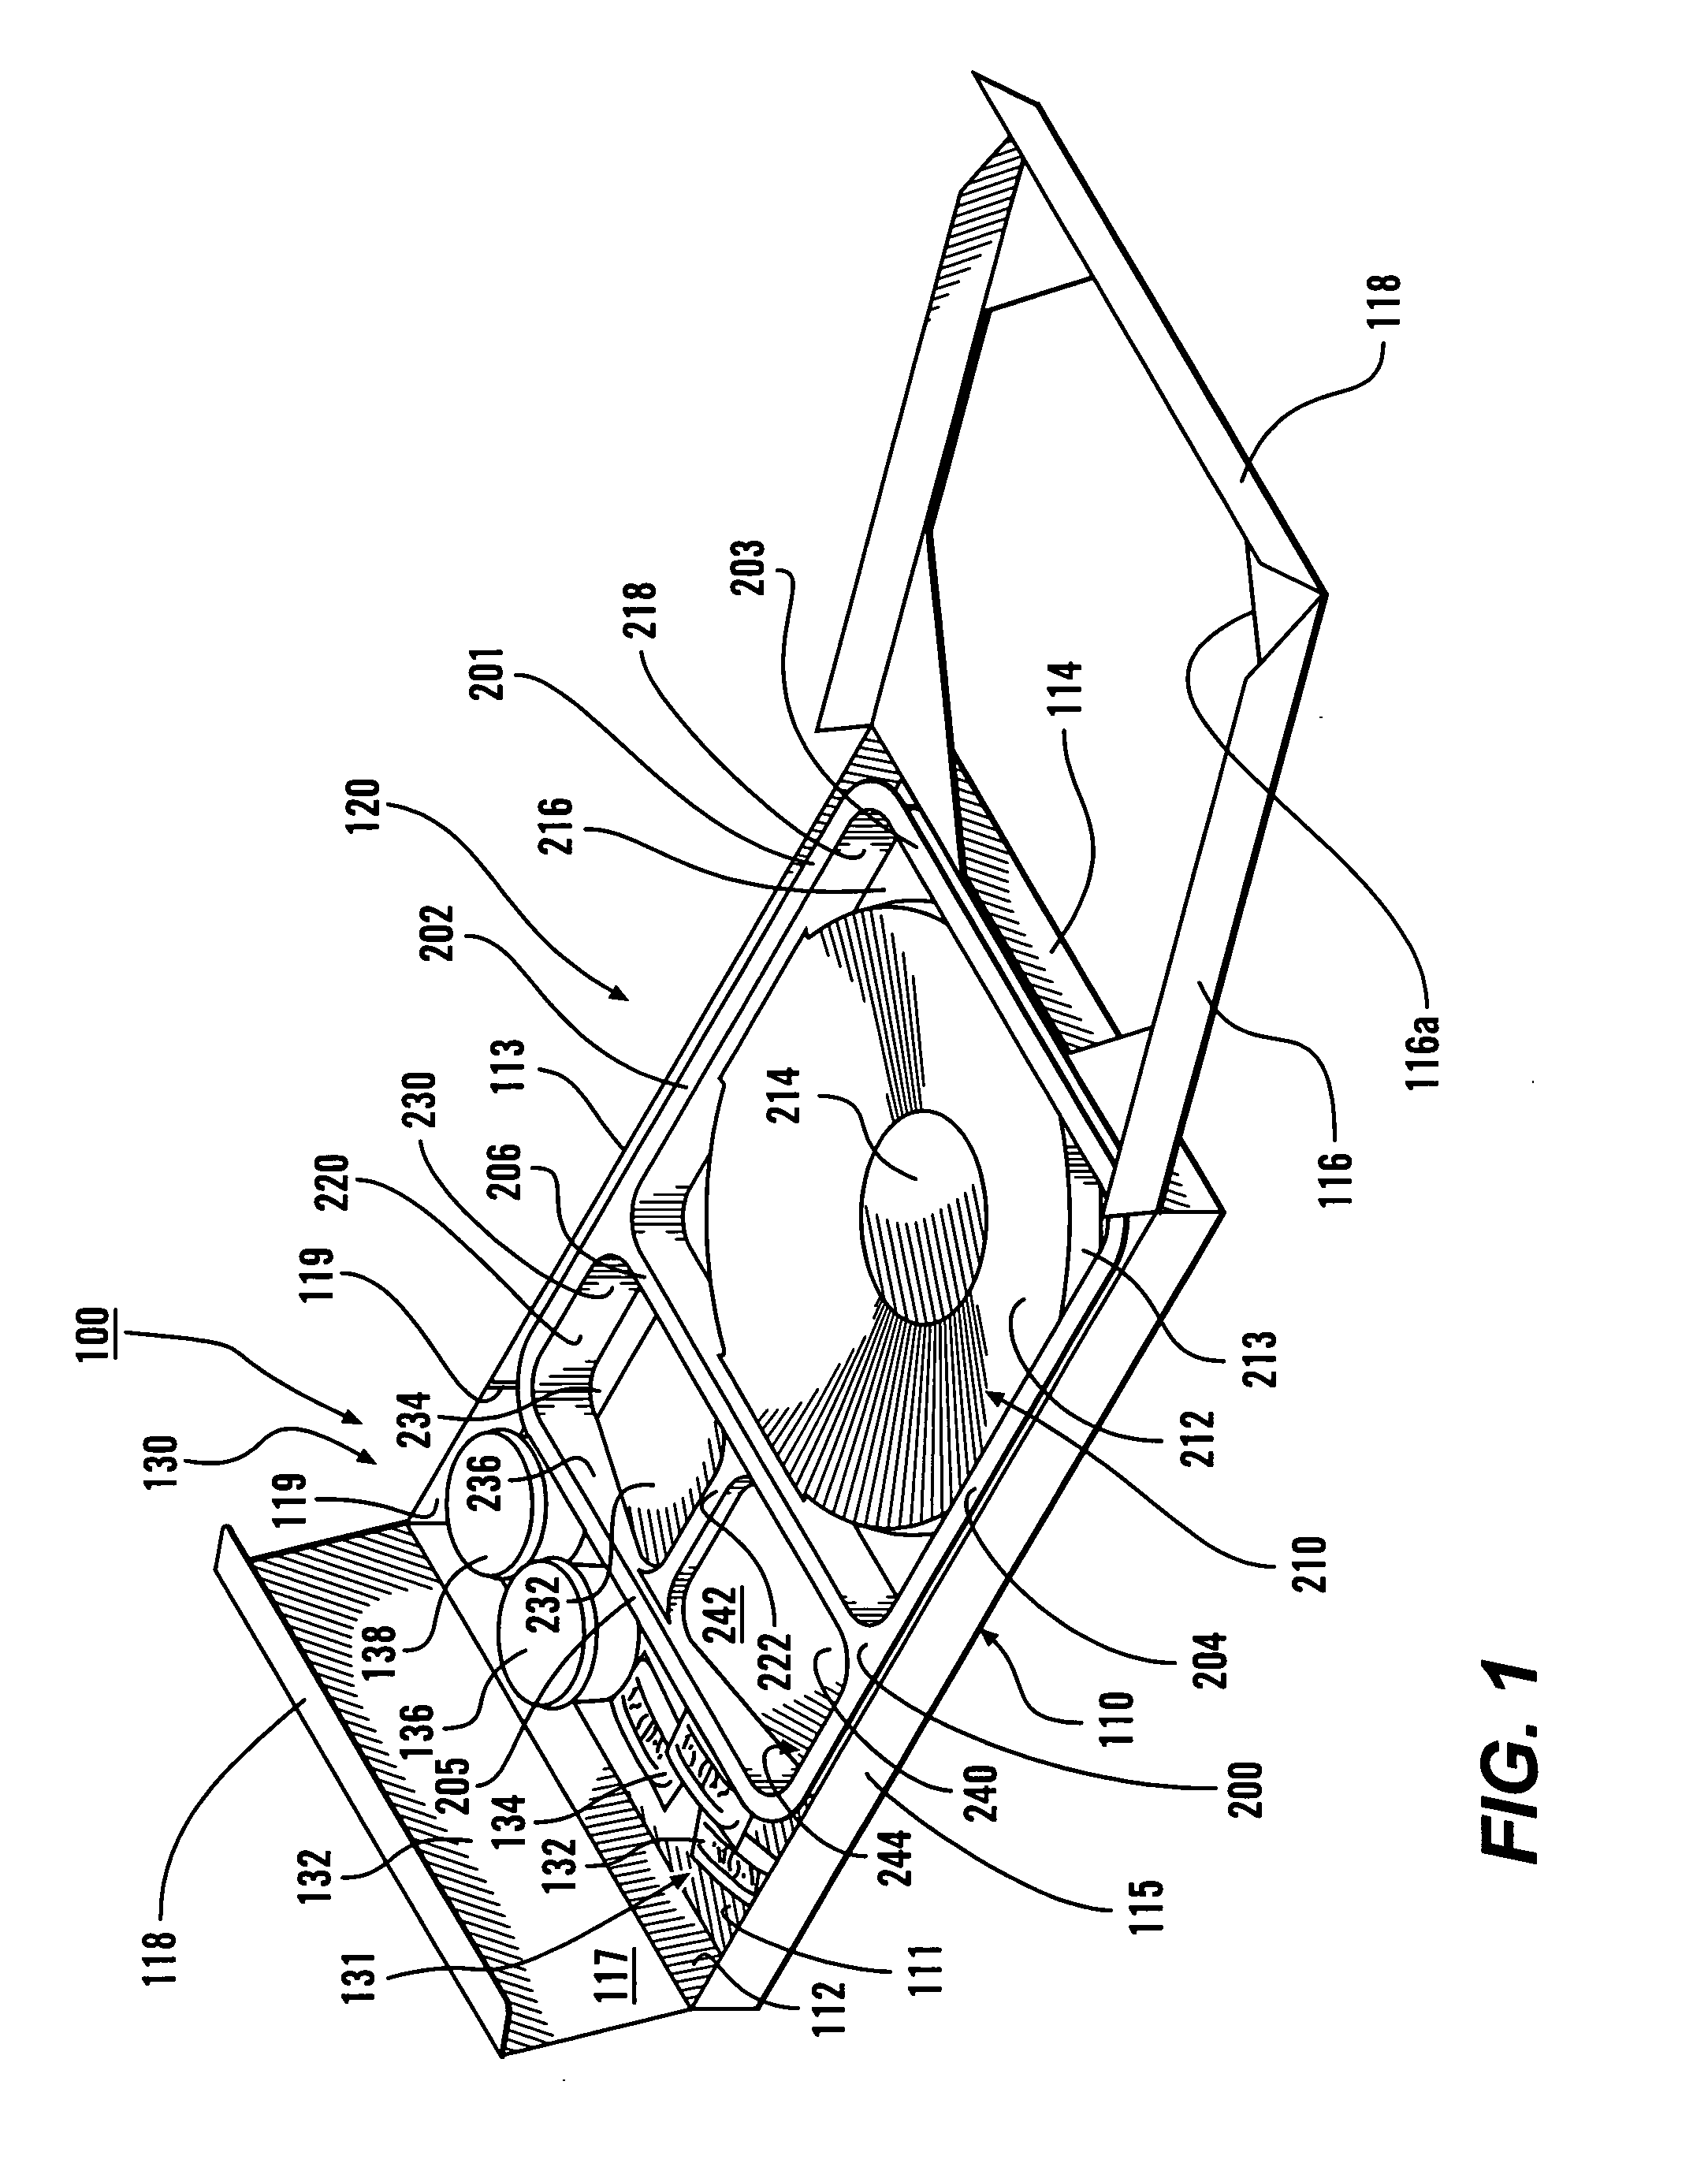 Pre-packaged food tray kit and method of use